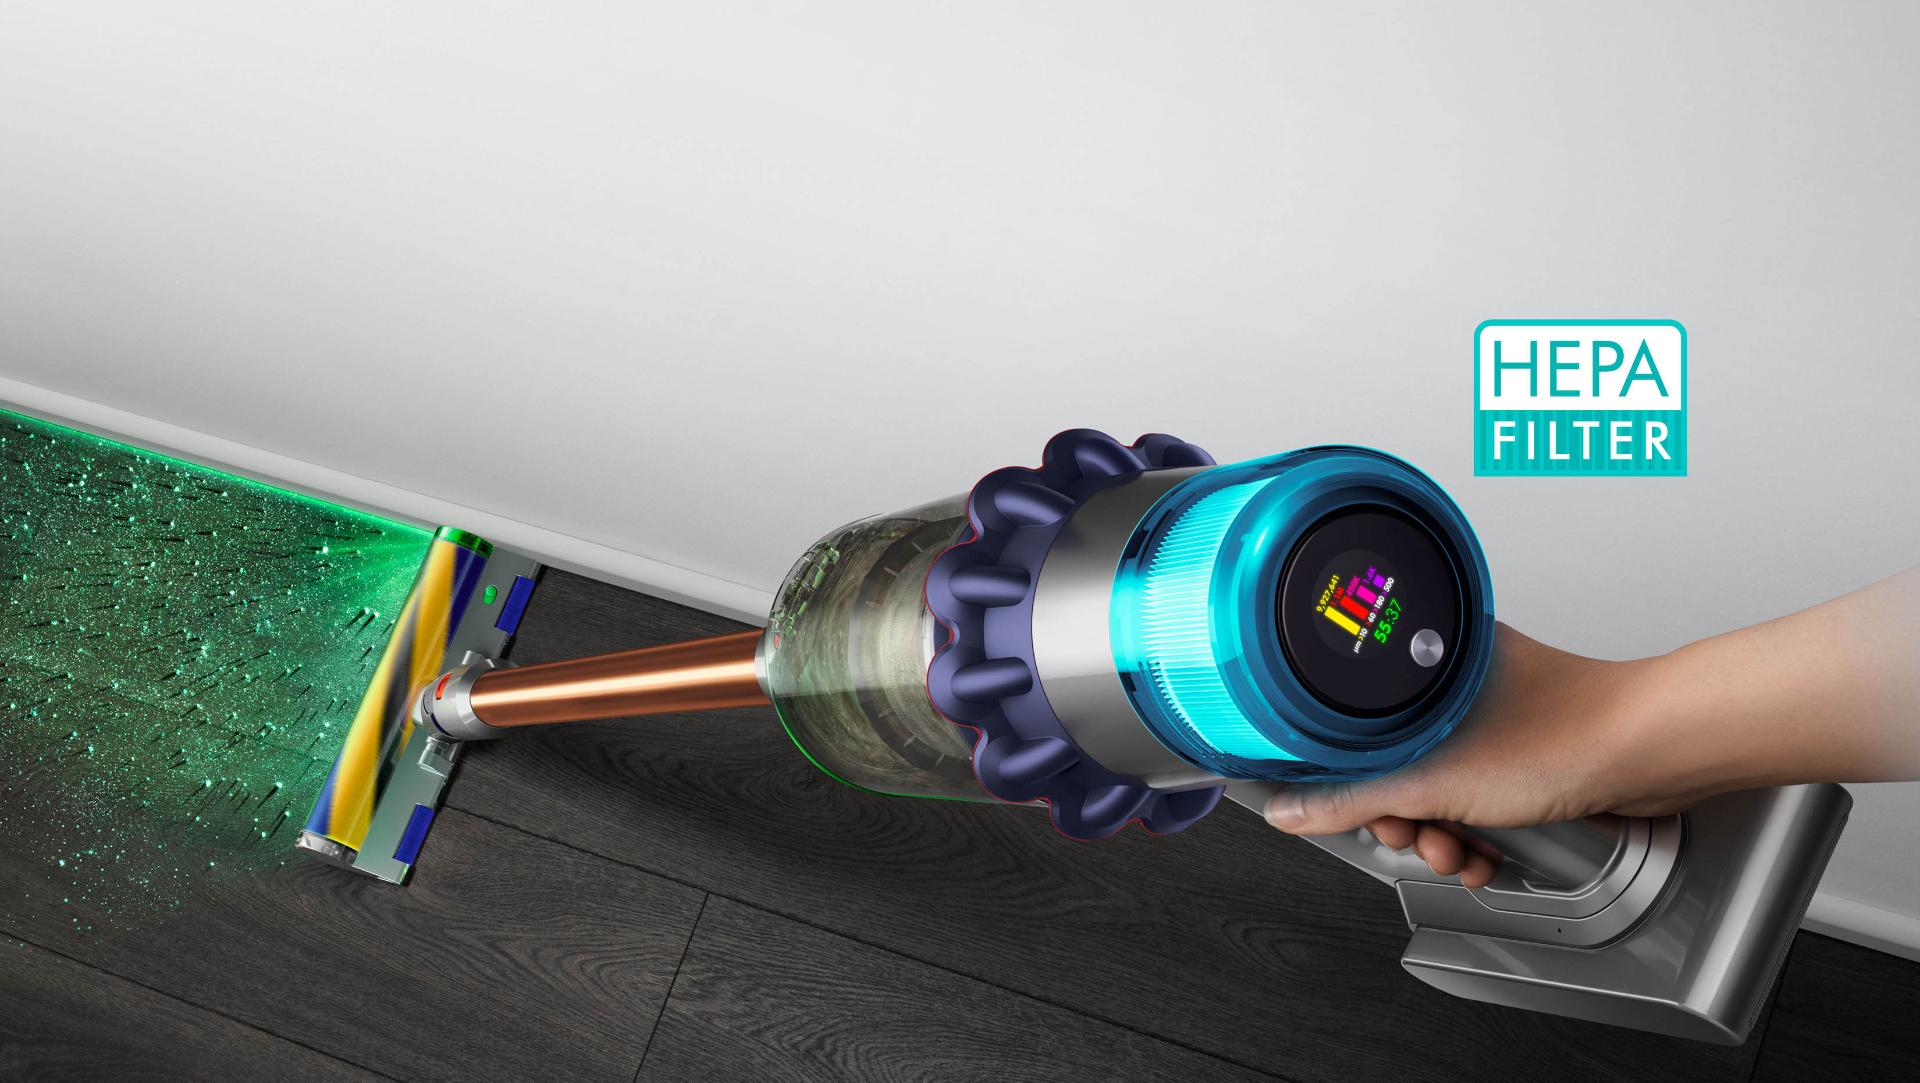 Close-up of hand holding the Dyson V15 Detect vacuum